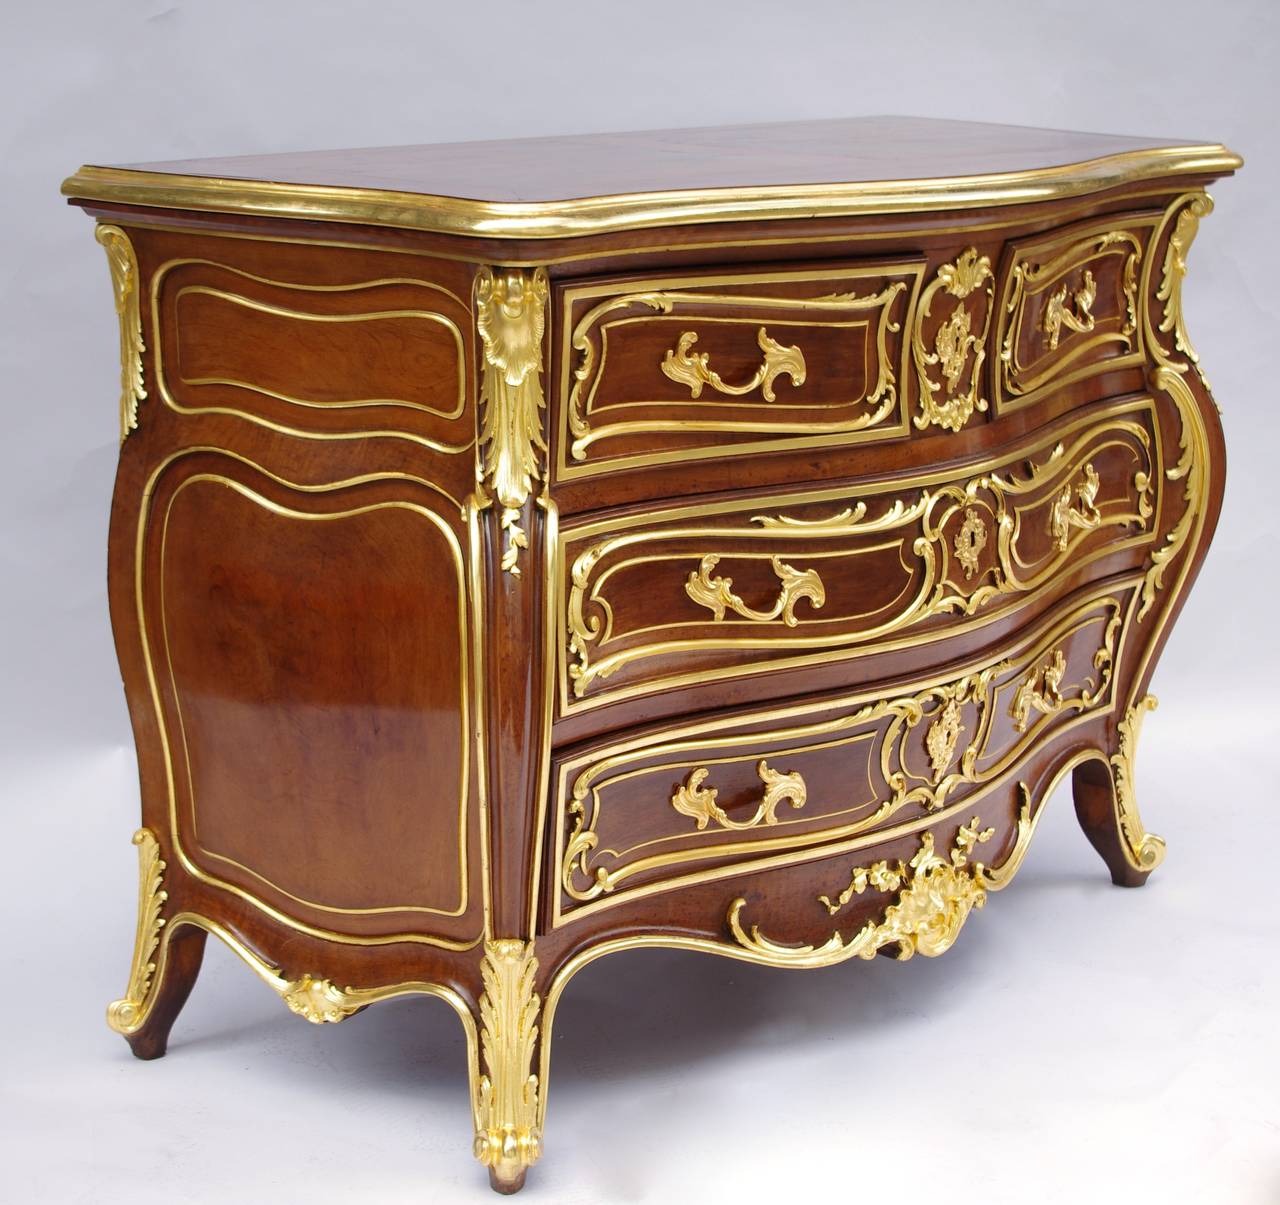 Louis XV style walnut tomb shaped commode opening with four drawers on three levels.  Chantourné uprights, crossbow shaped apron, standing on four small curved legs.
Gilt highlights such as acanthus leaves on angles, lingotière or net framing the